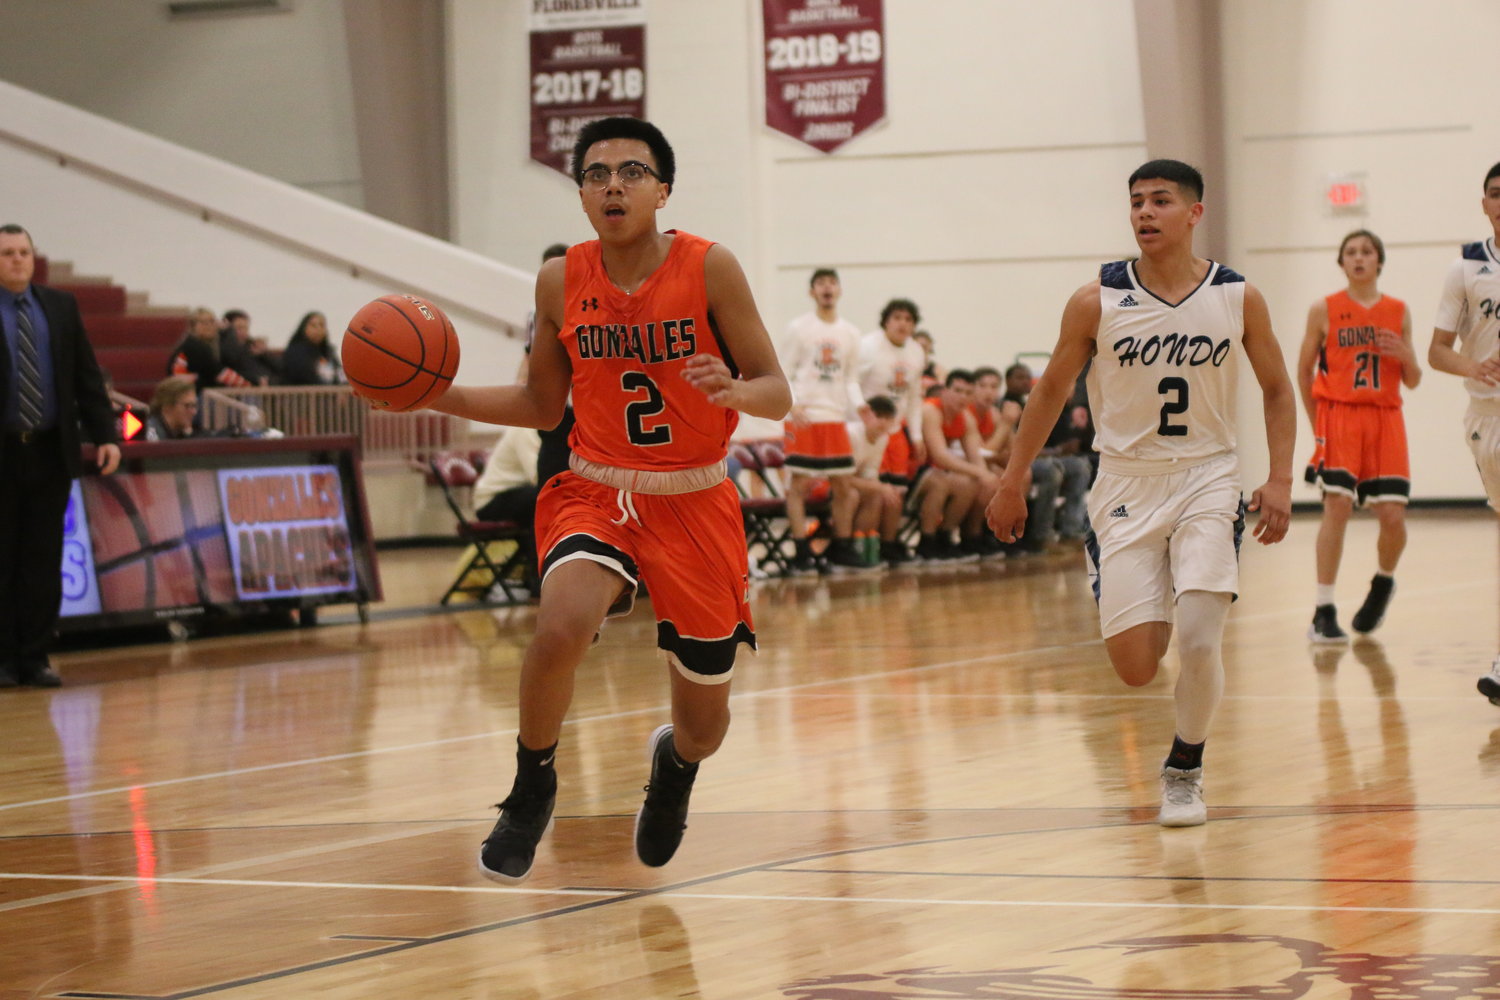 Xavier Aguayo (2) led the team in scoring with 18 points in Gonzales' 68-63 overtime victory over Hondo.